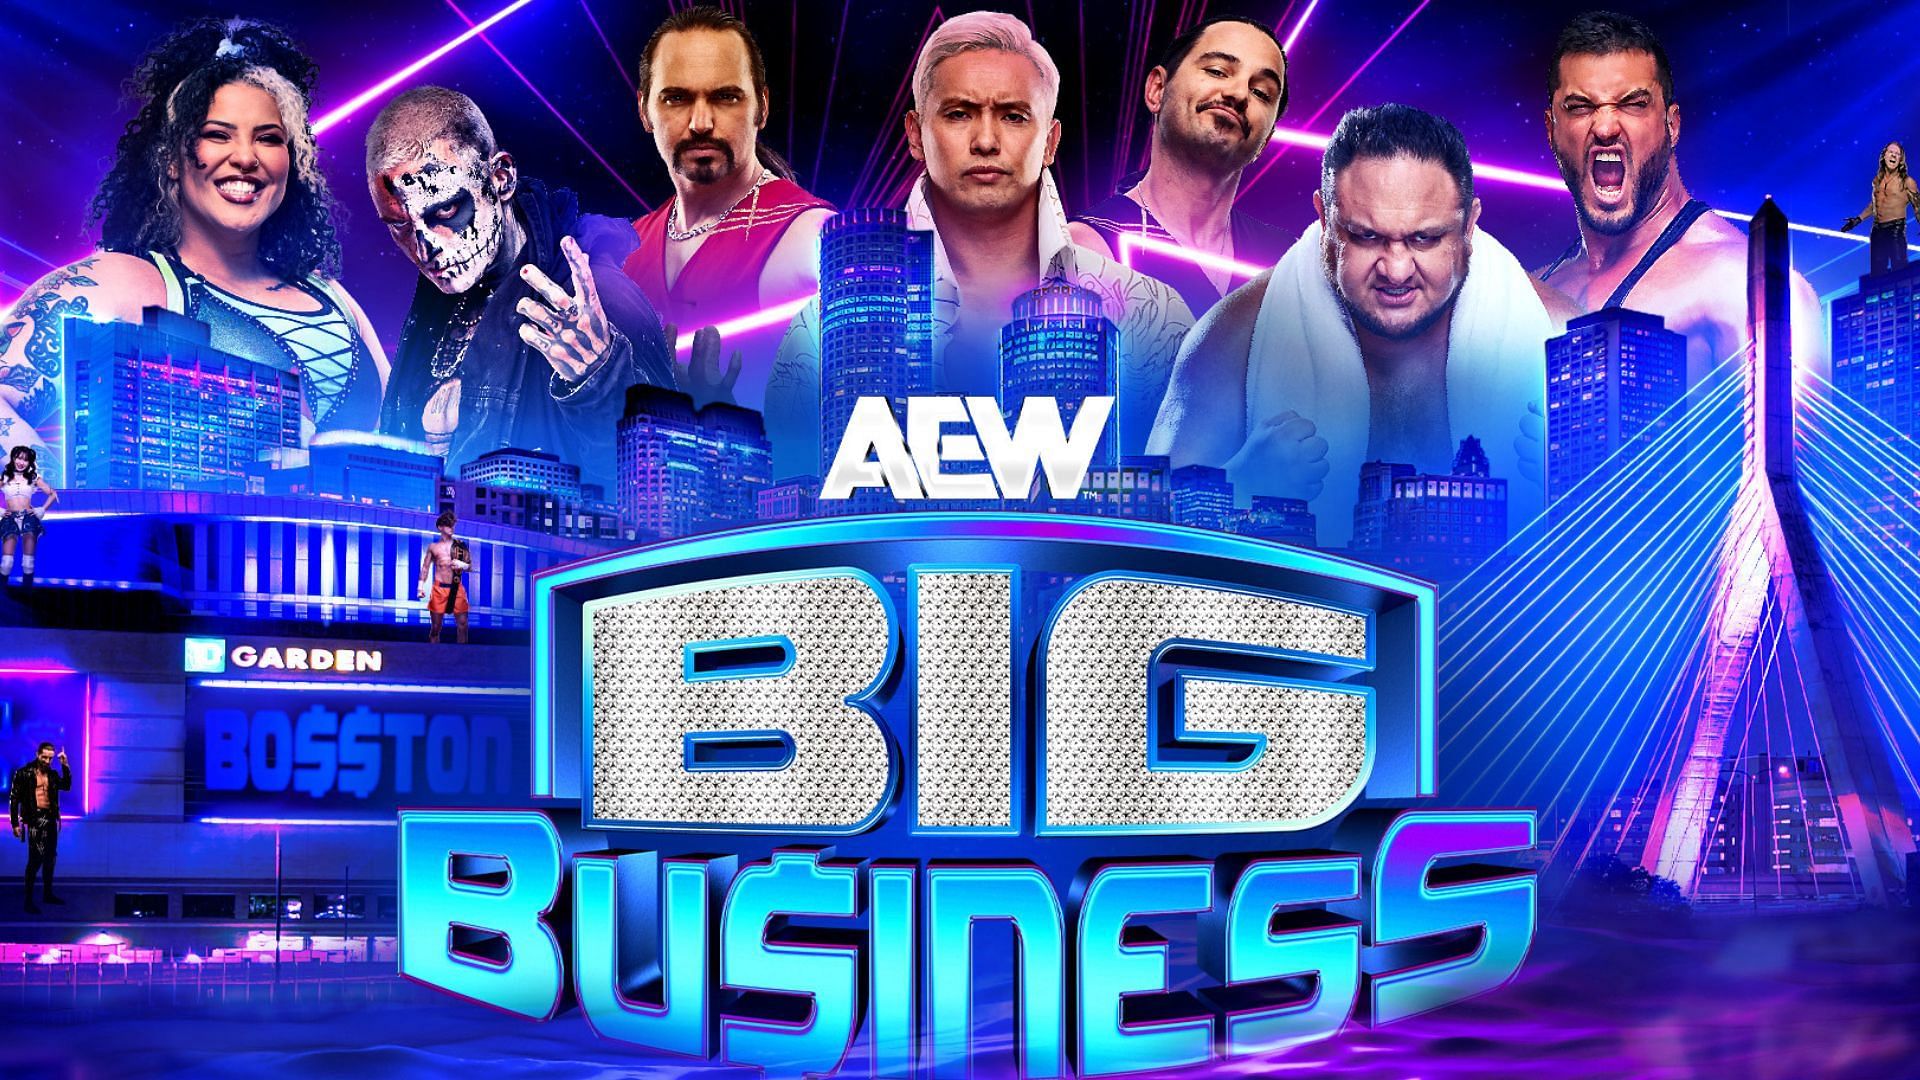 AEW Dynamite: Big Business will air from the TD Garden in Boston.